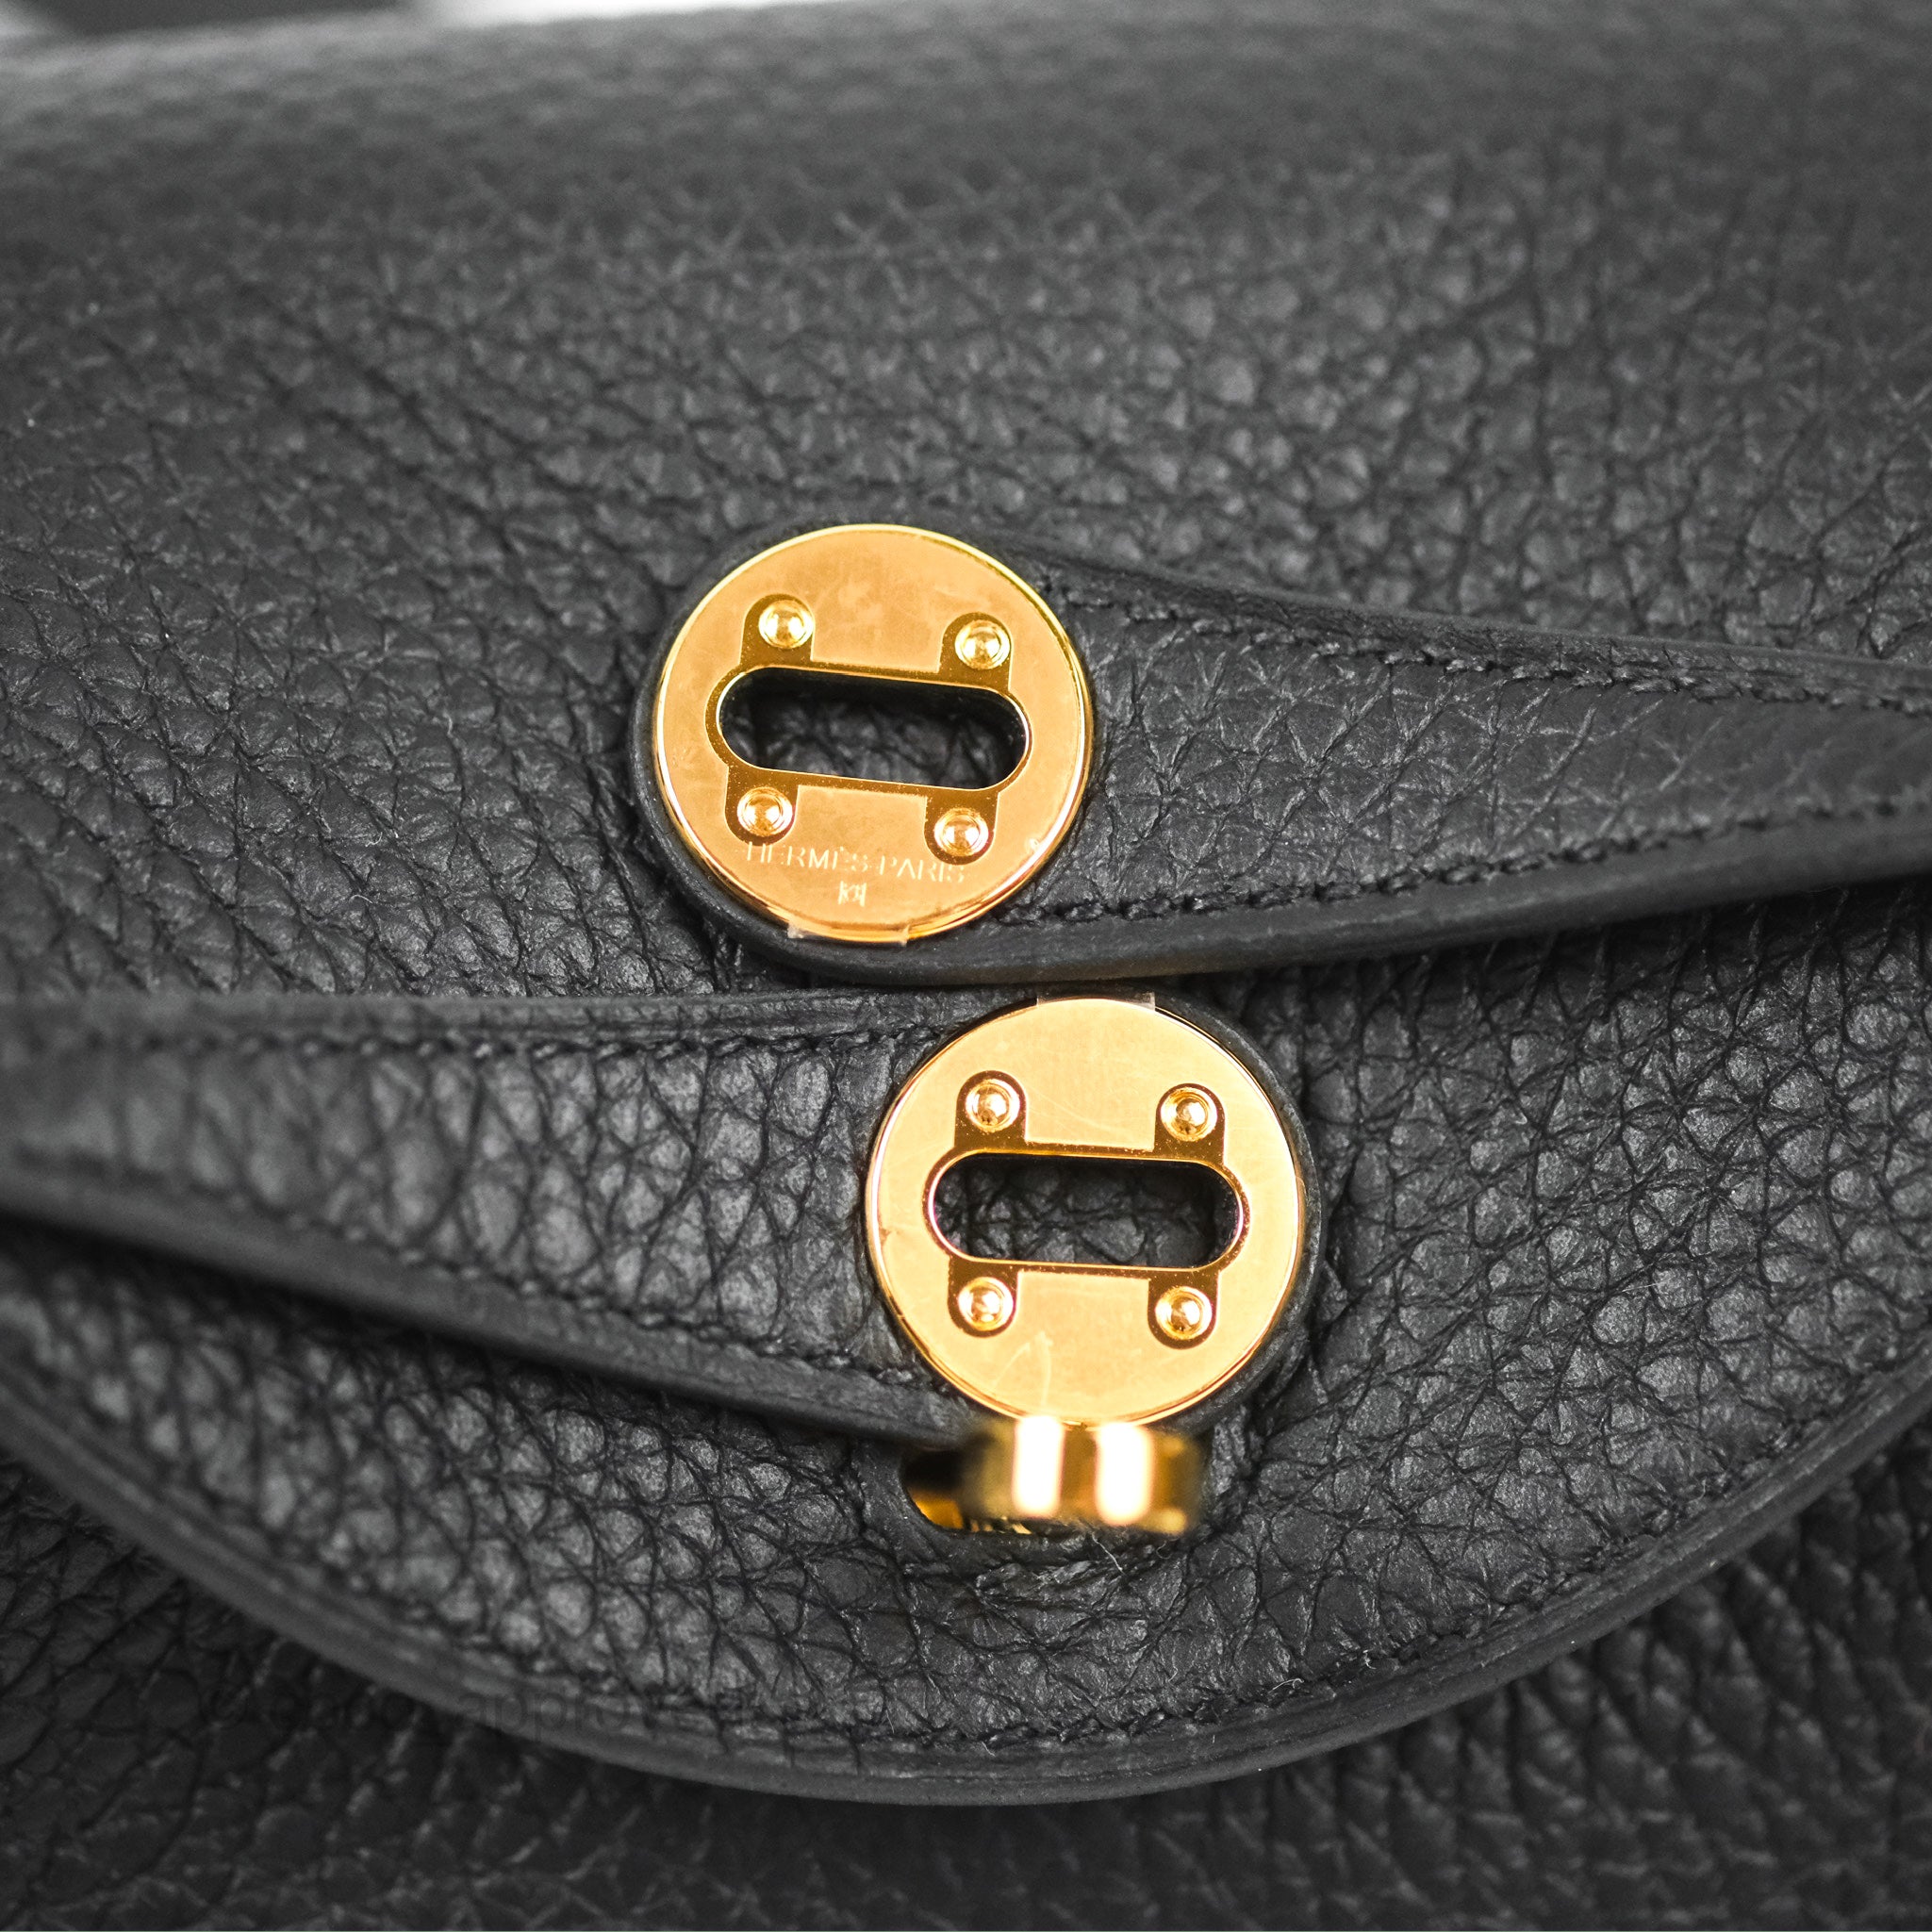 Hermès Mini Lindy 20 Black Clemence Gold Hardware – Coco Approved